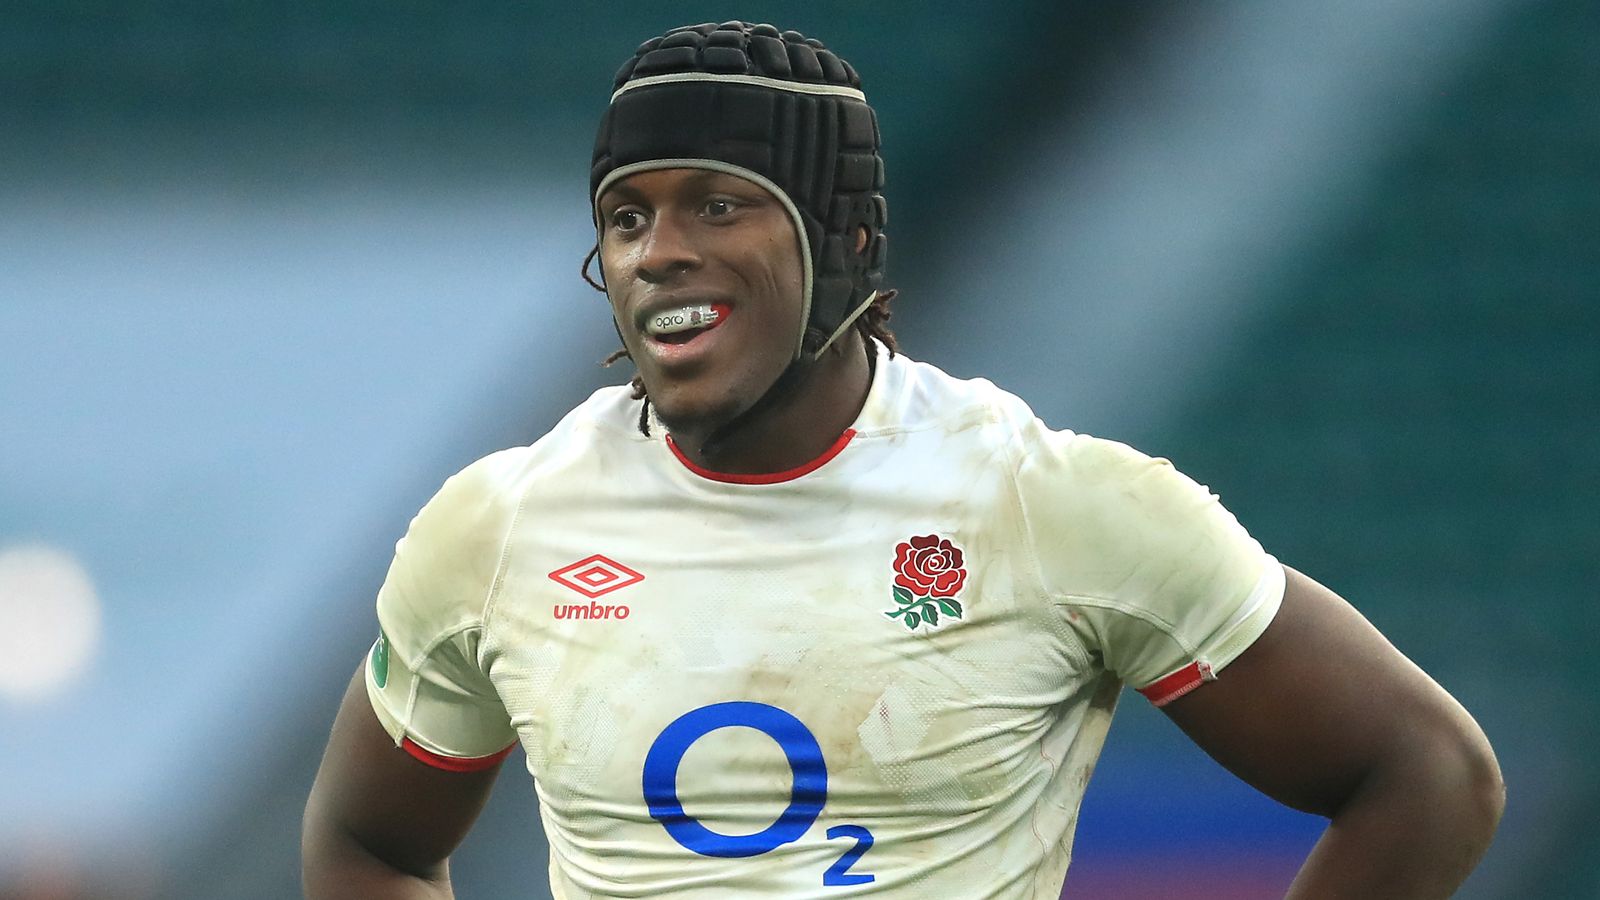 Maro Itoje: Jamie George urges England lock to keep up intensity despite  penalties conceded | Rugby Union News | Sky Sports